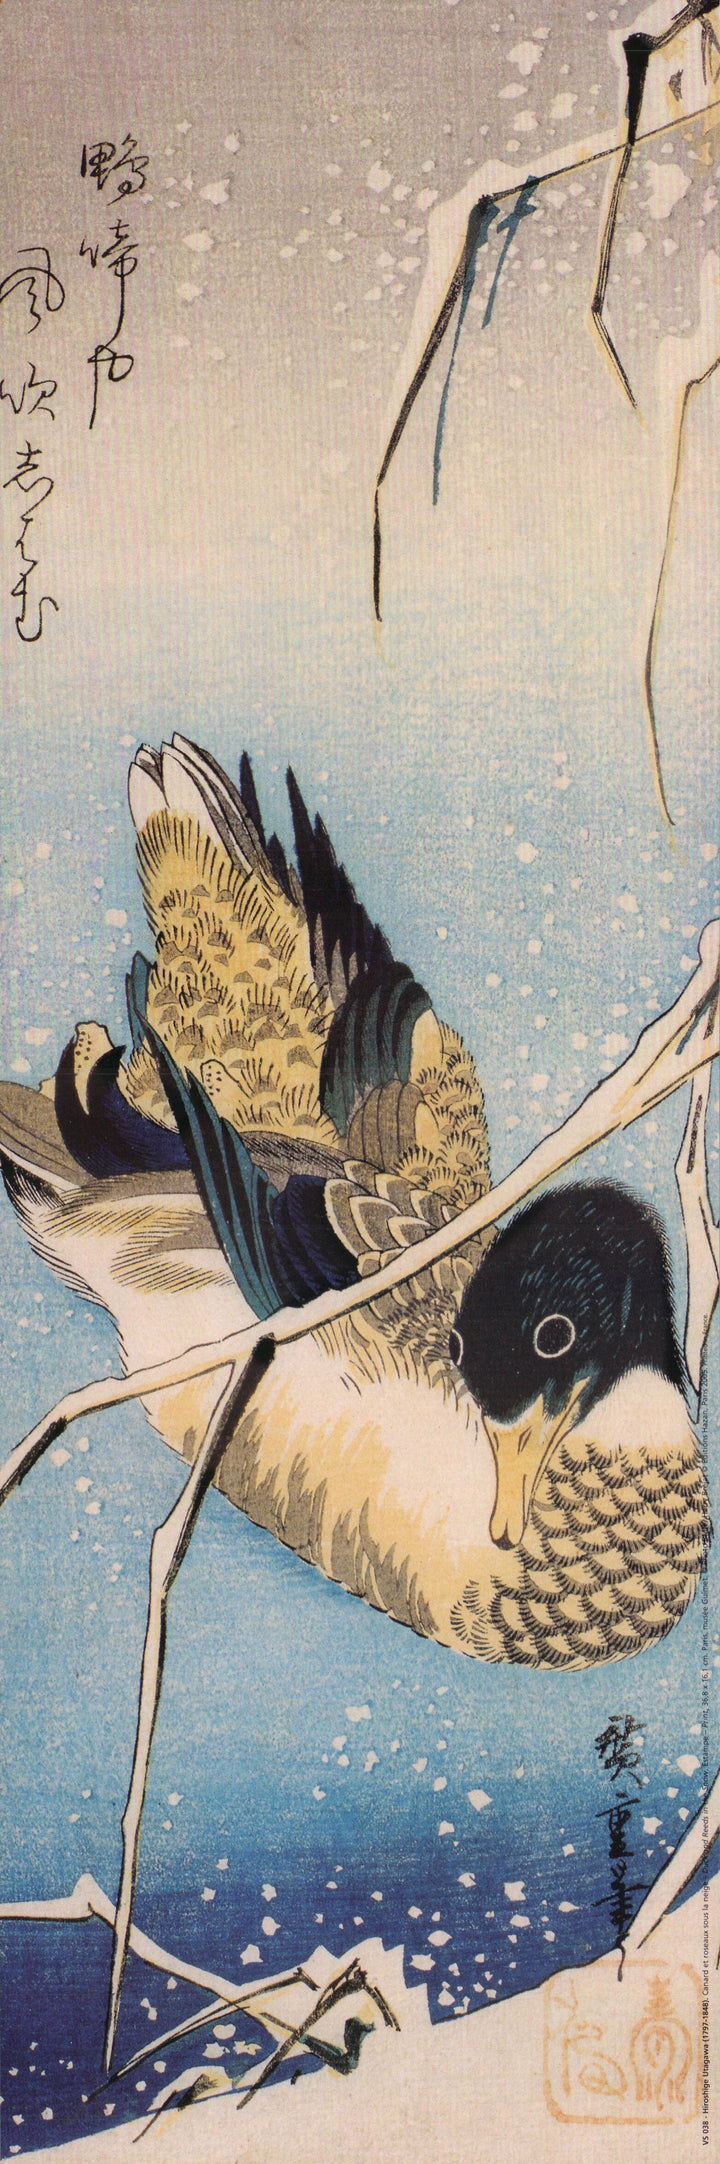 Duck And Reeds In The Snow by Hiroshige Utagawa - 8 X 24 Inches (Art Print)